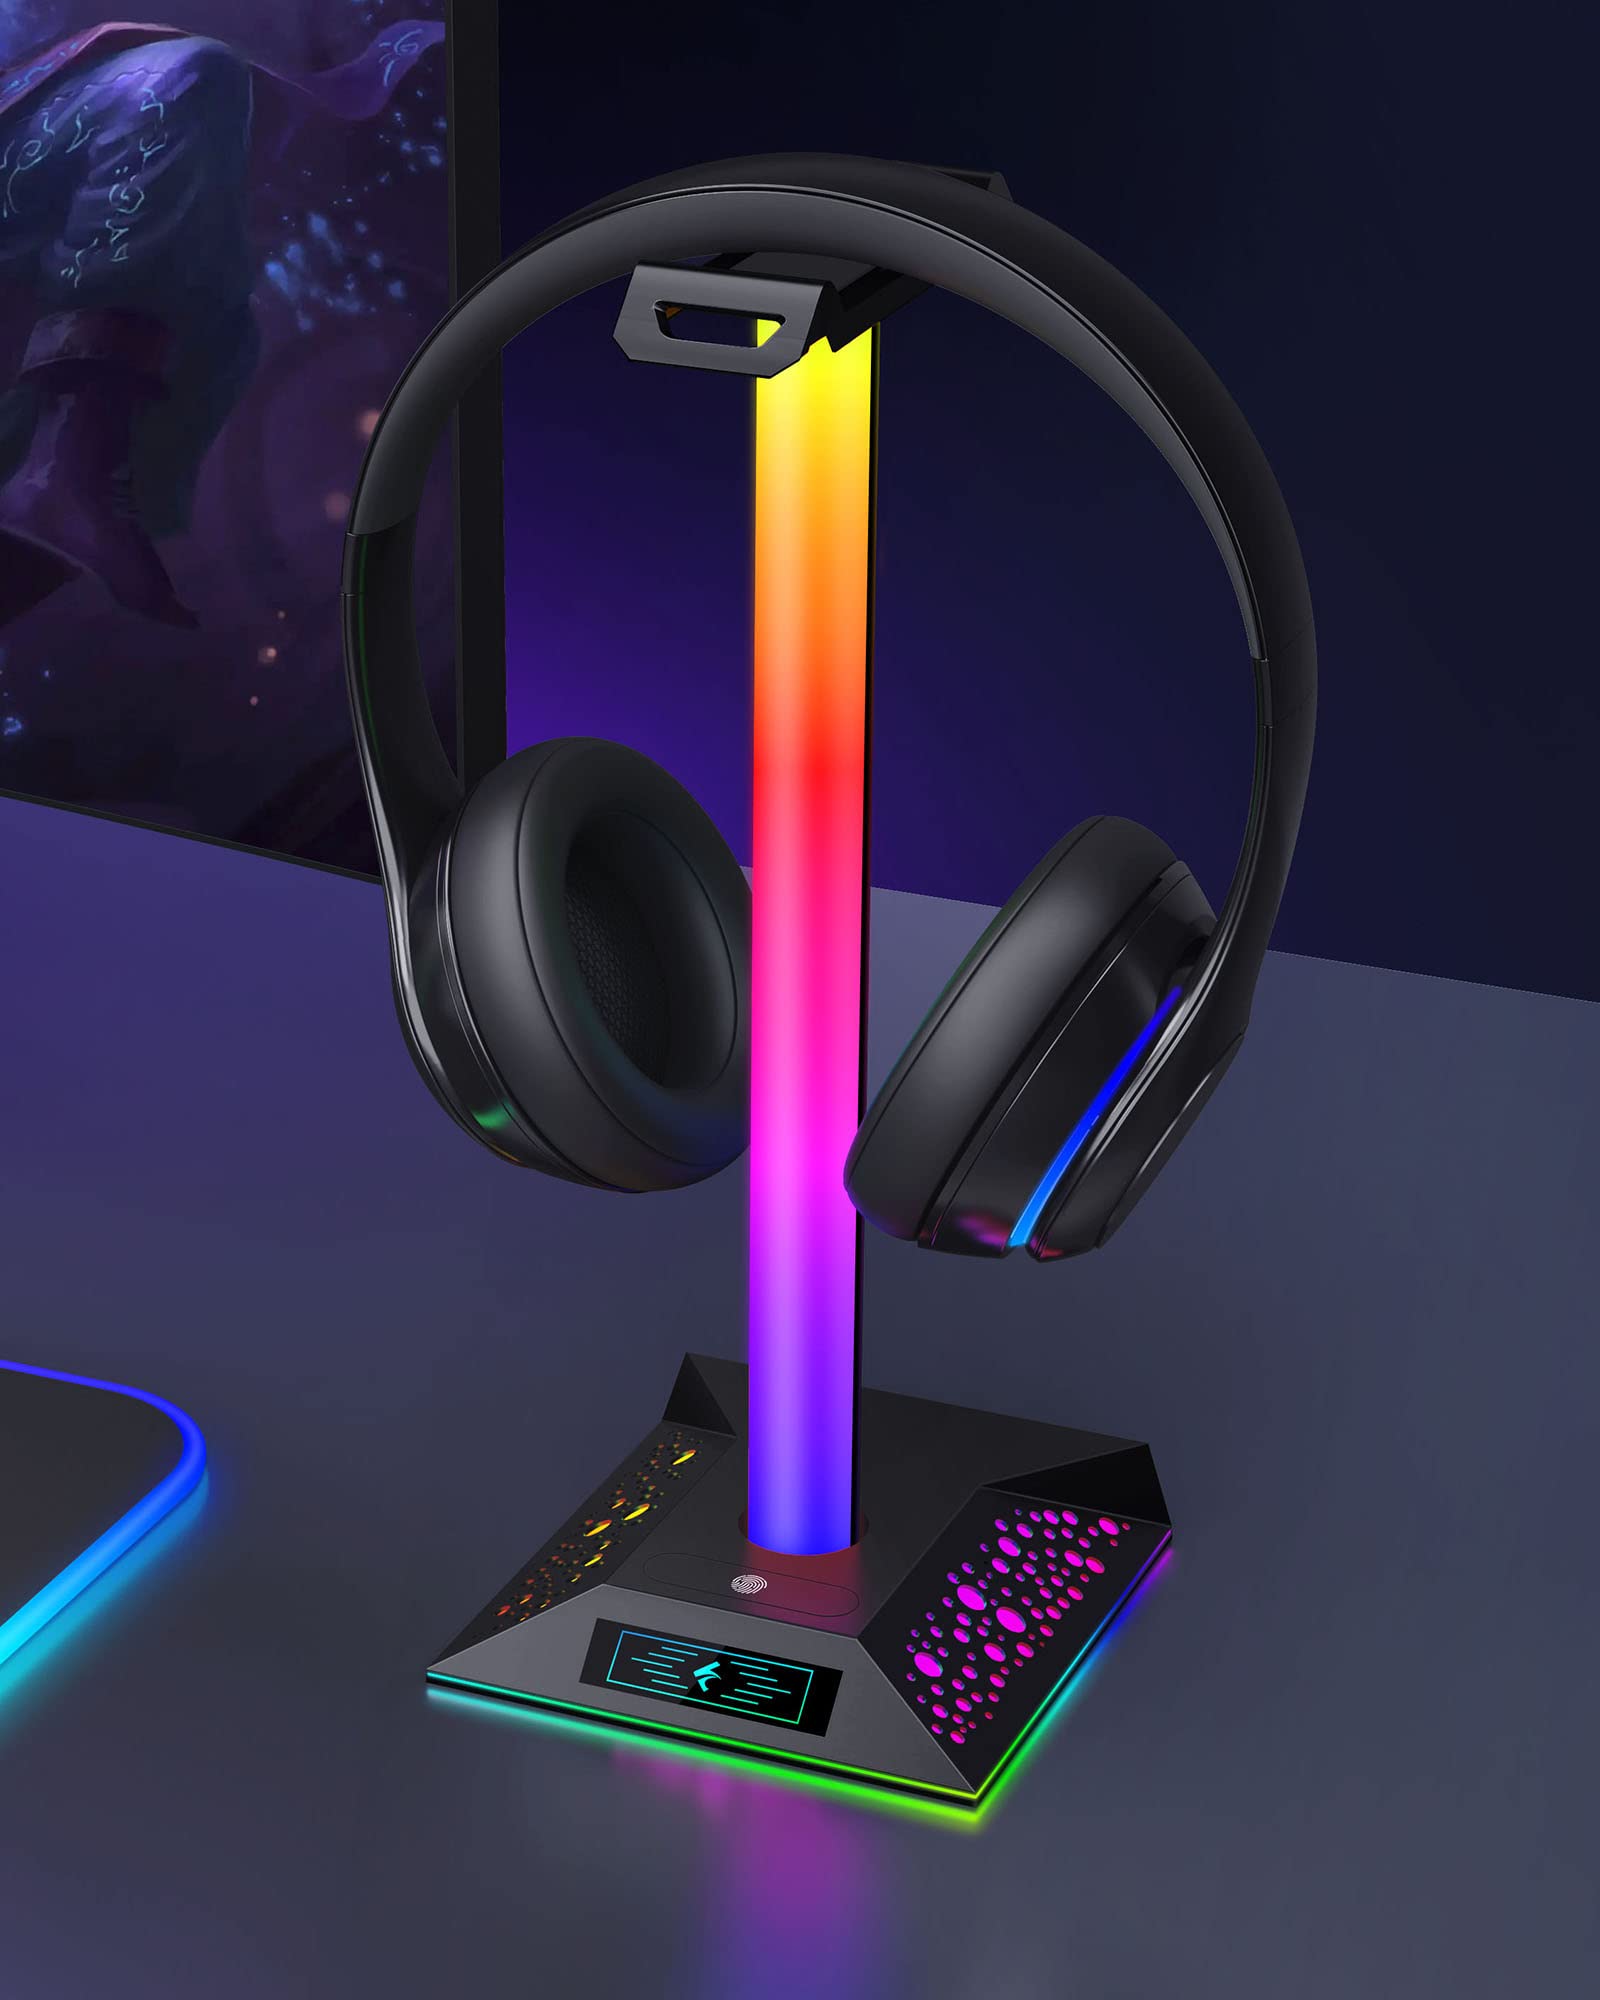 Xergur Gaming Headphone Stand PC Accessories, RGB Headset Stand with 2 USB Charger, Cool LED Headphone Holder PC Gaming Accessories Gift for Boys Men Gamers, Computer Game Hardware for Desk